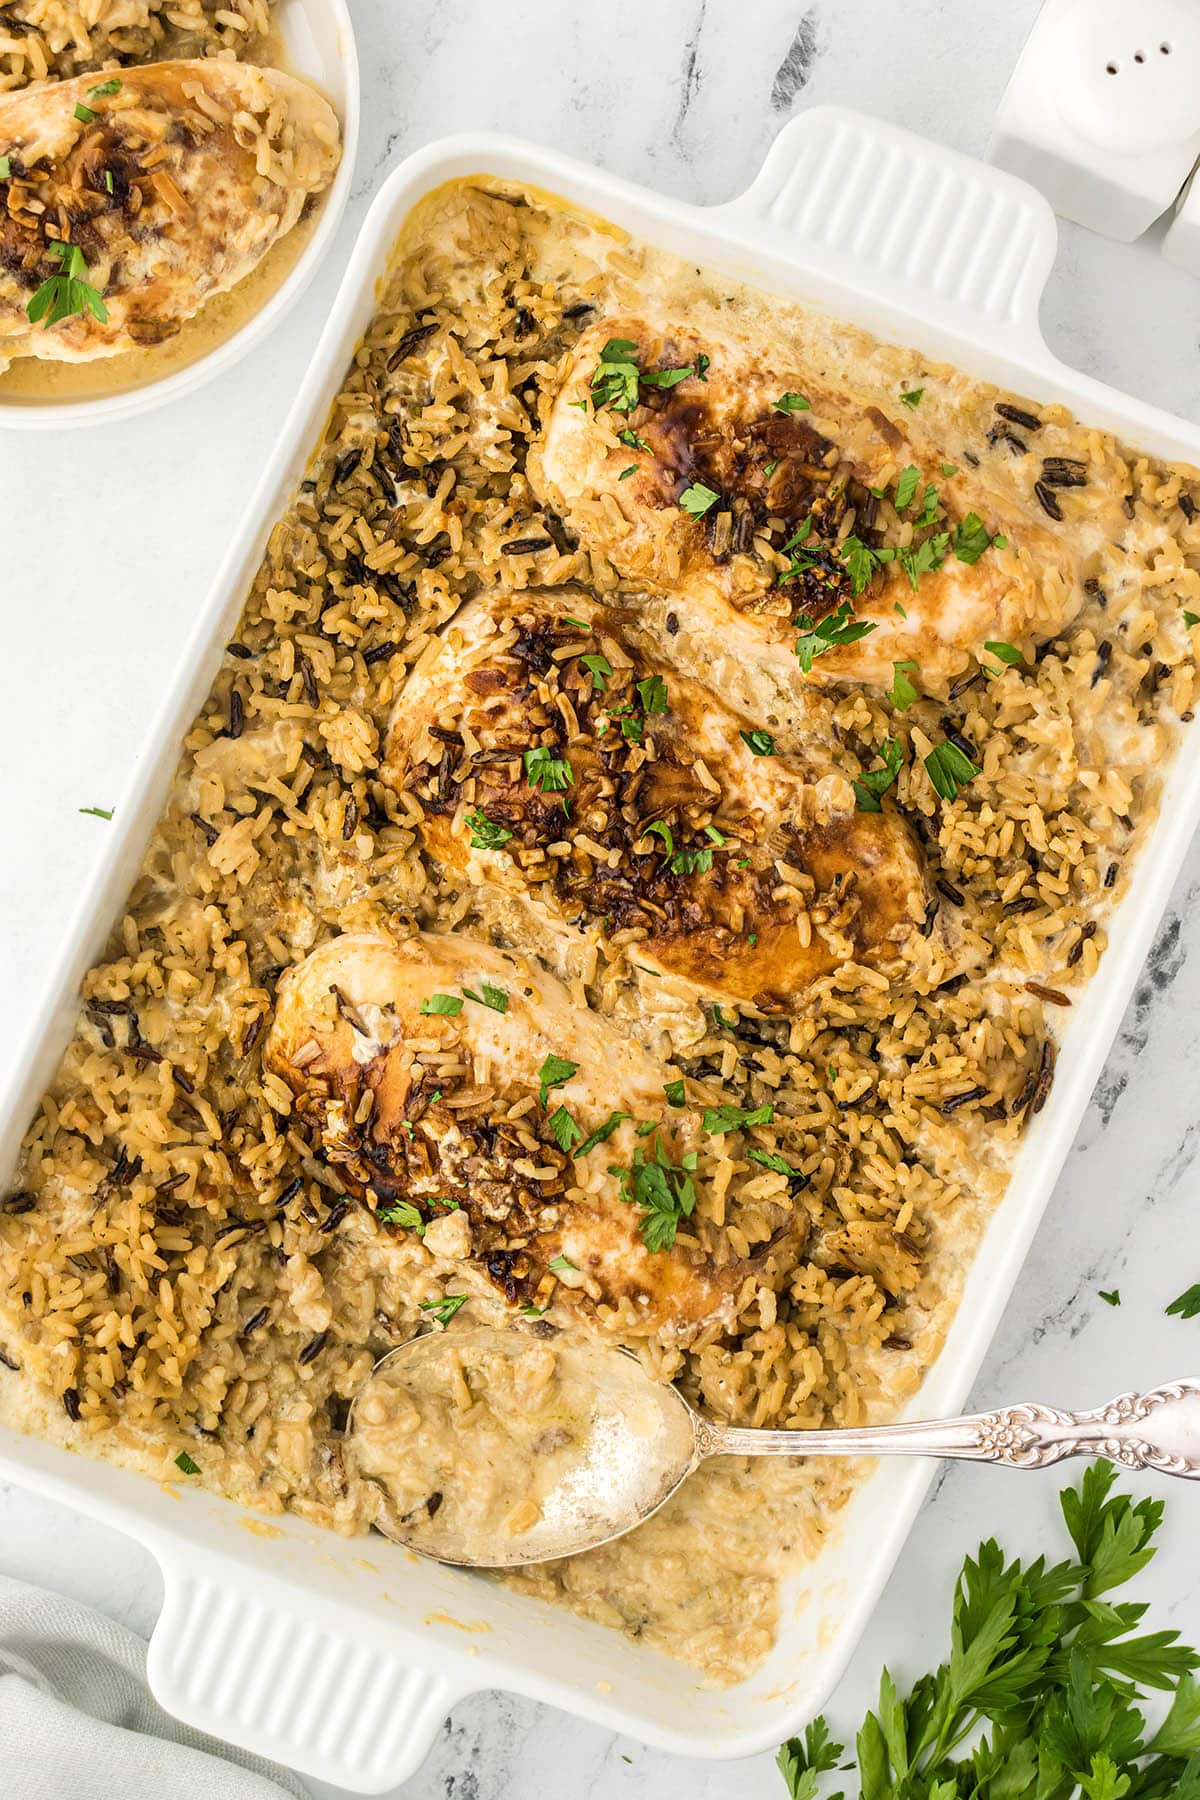 Chicken and rice bake in a casserole dish, with a serving spoon.